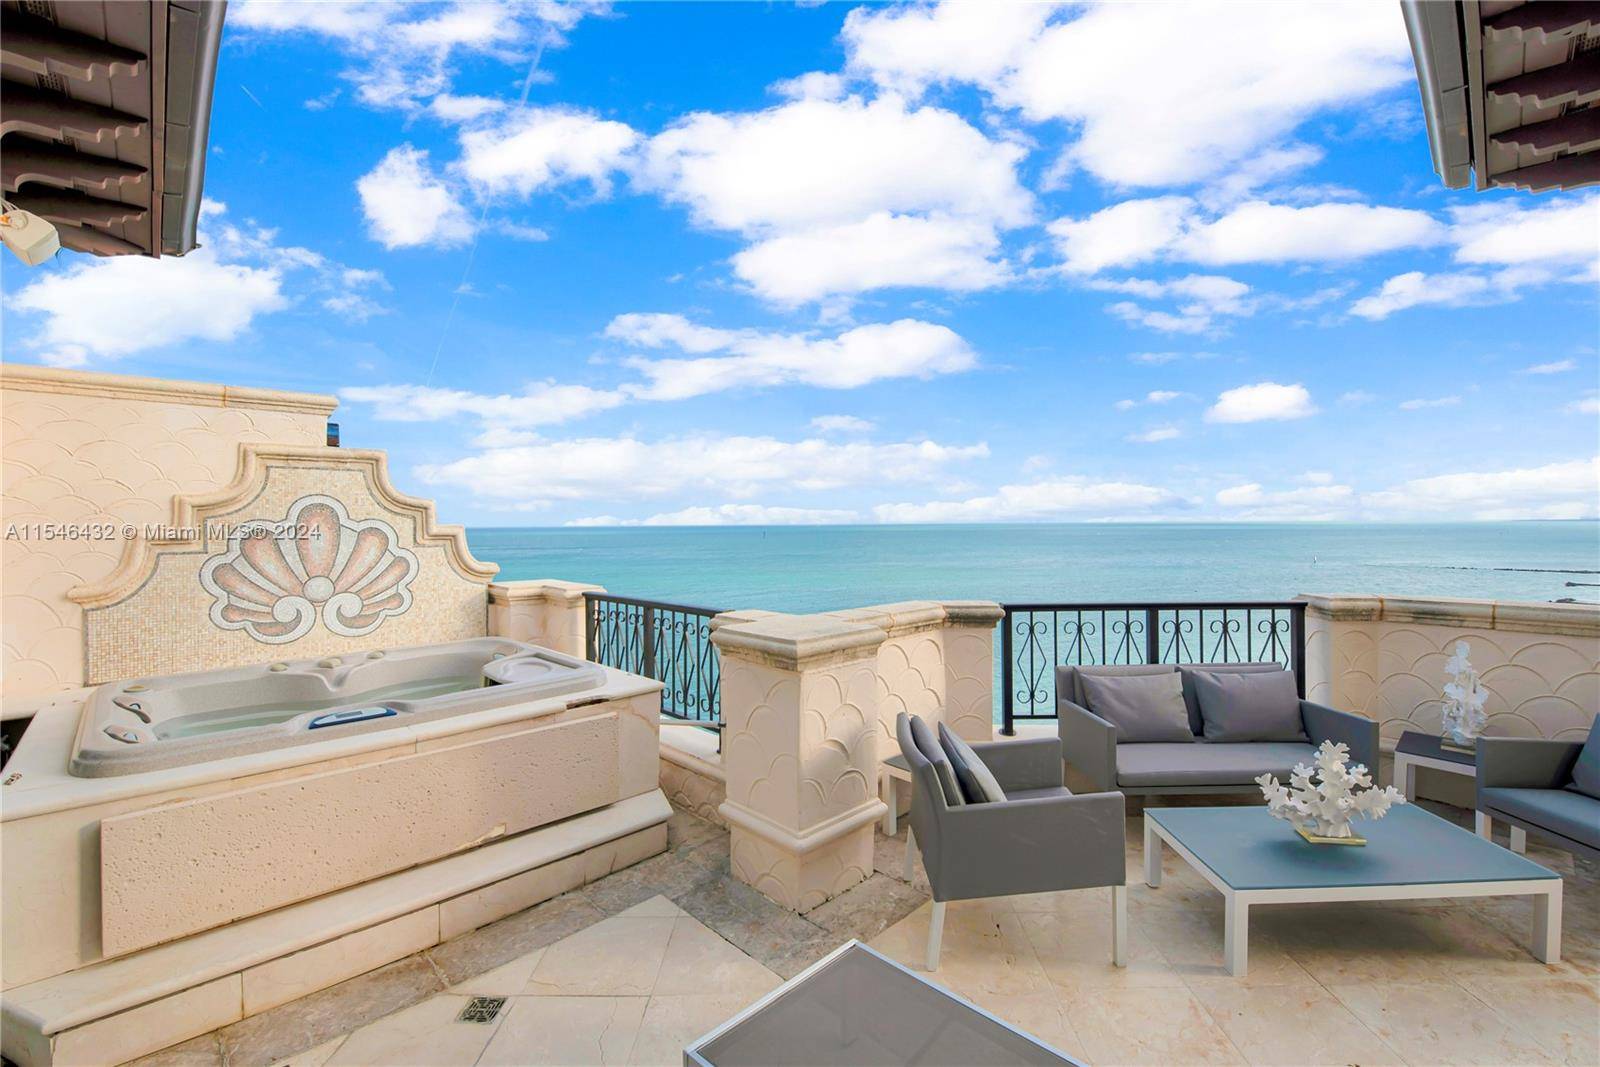 Exquisite Oceanside Penthouse, Five bedrooms and 5 1 2 bathrooms with 4932 sq.